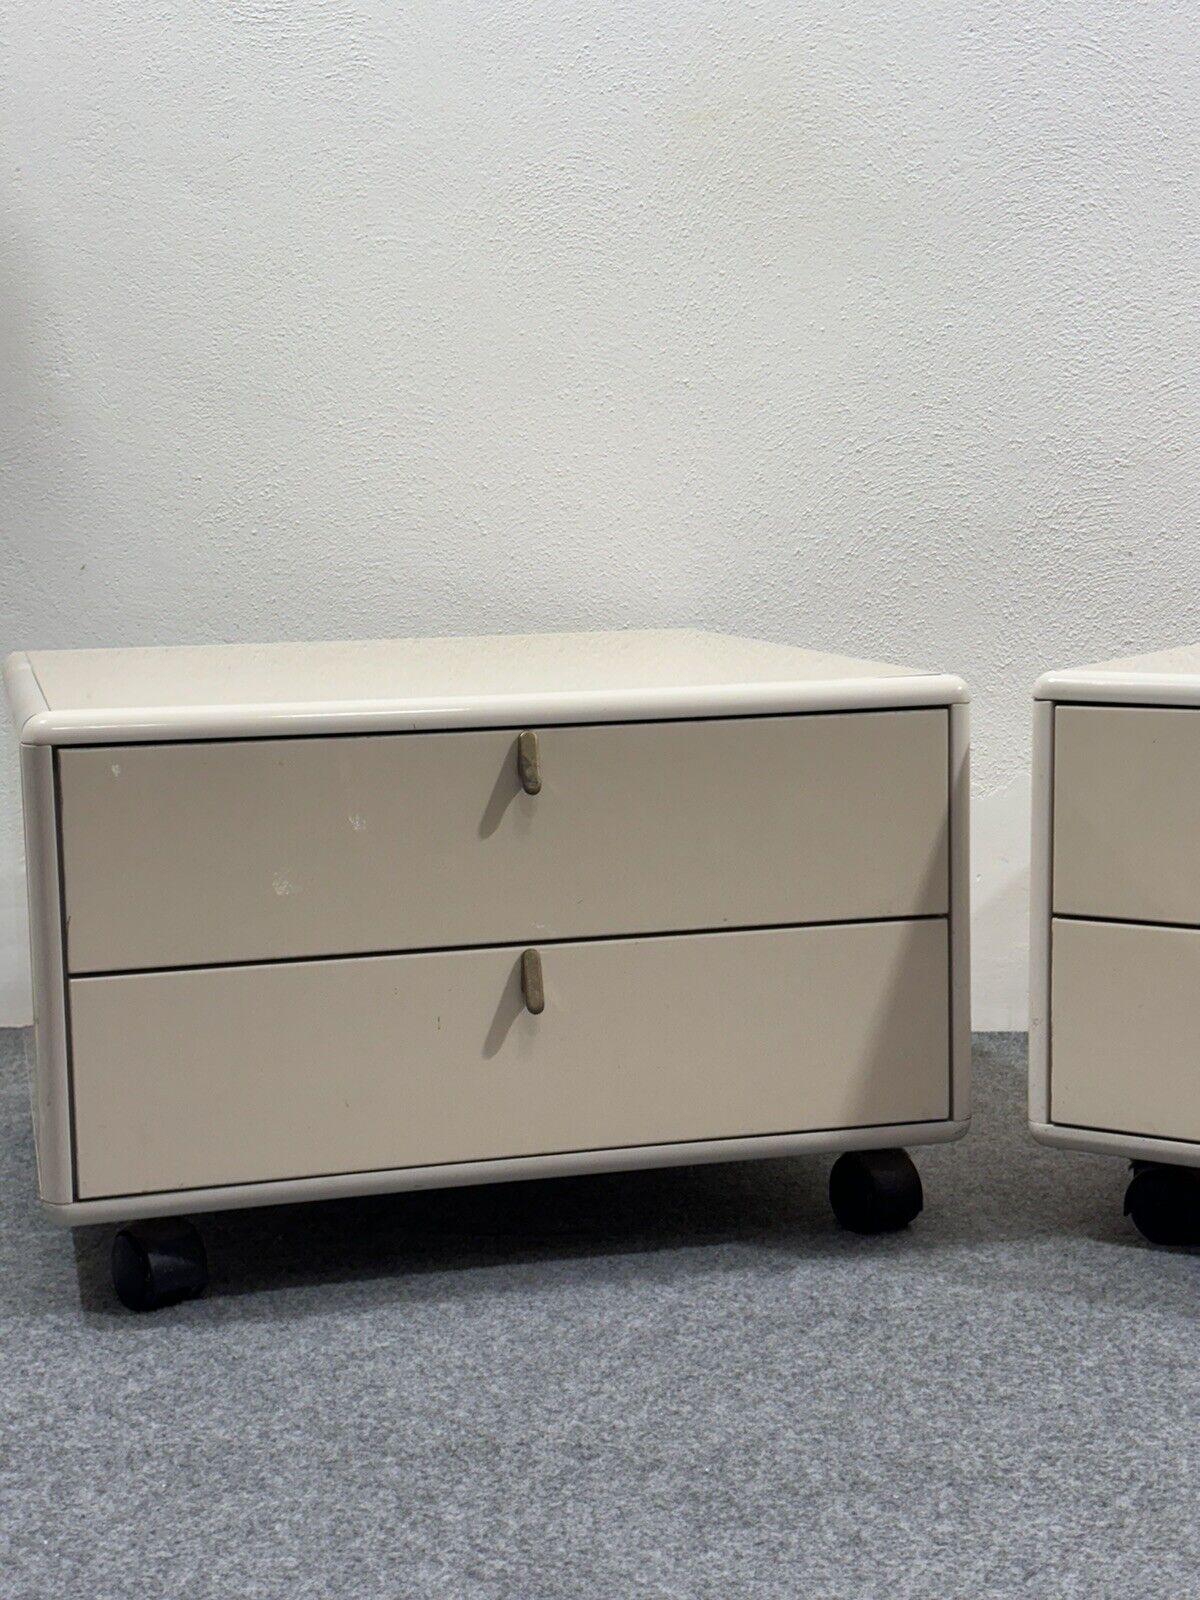 George Coslin Pair Of Longato Henna Nightstands 1970s Modern Design In Good Condition For Sale In Taranto, IT